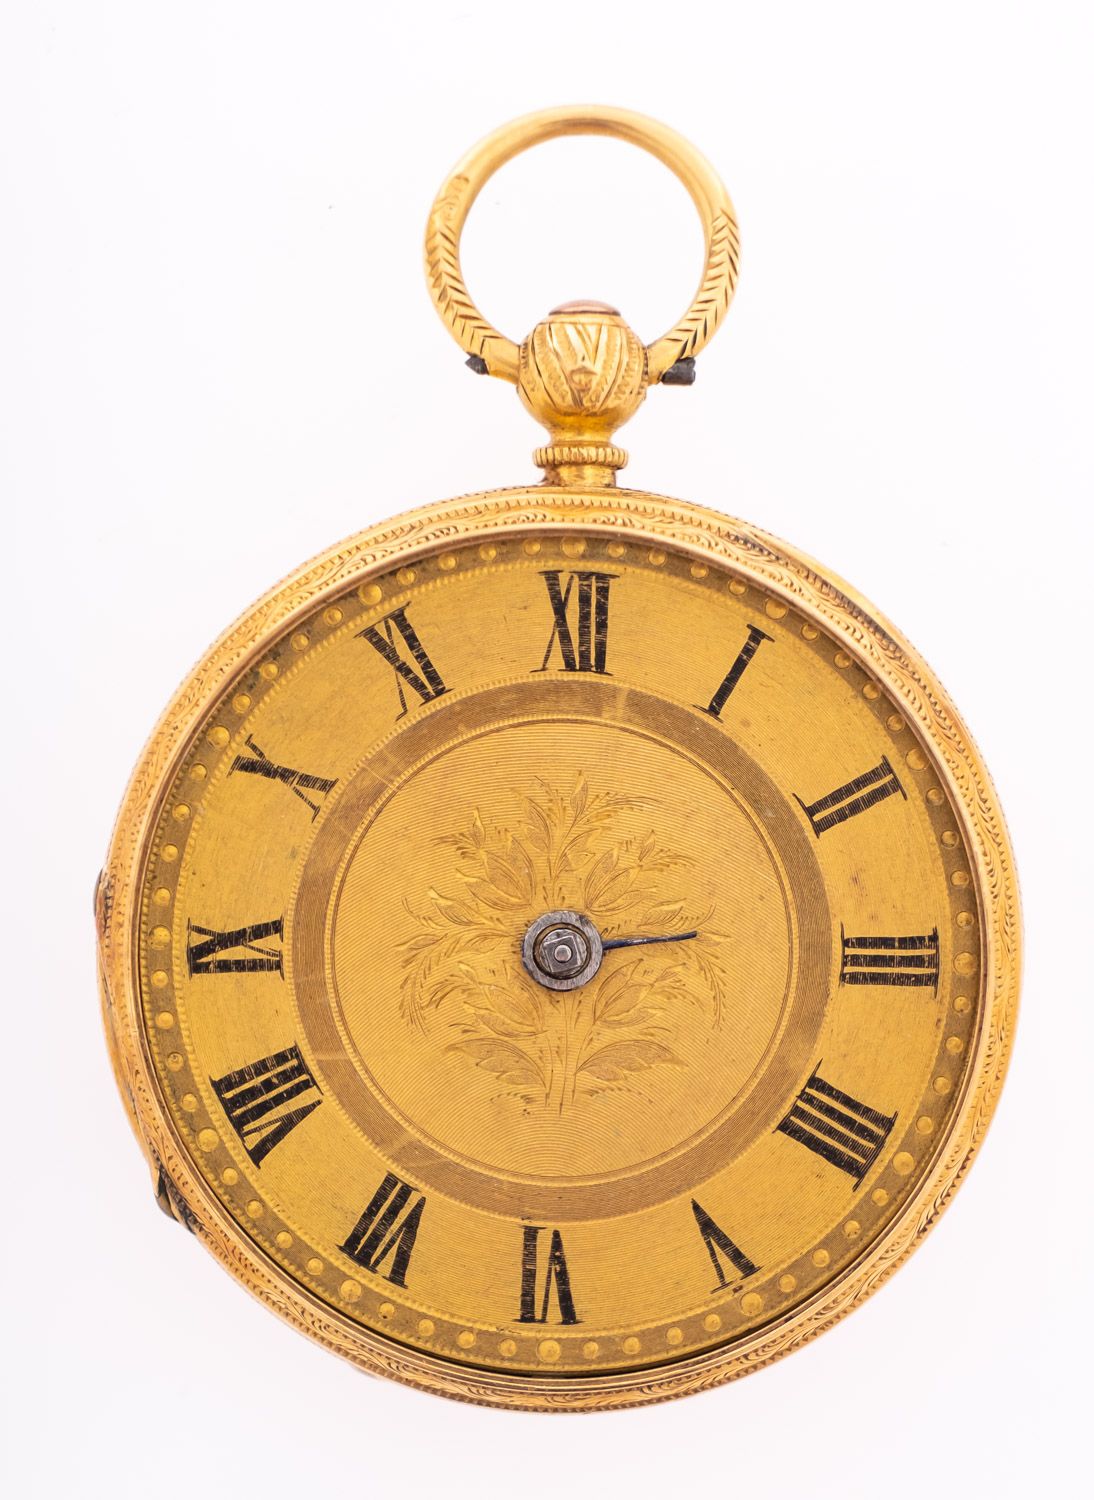 Rotherham, Coventry an 18ct gold pocket watch the gold dial having black Roman numerals,